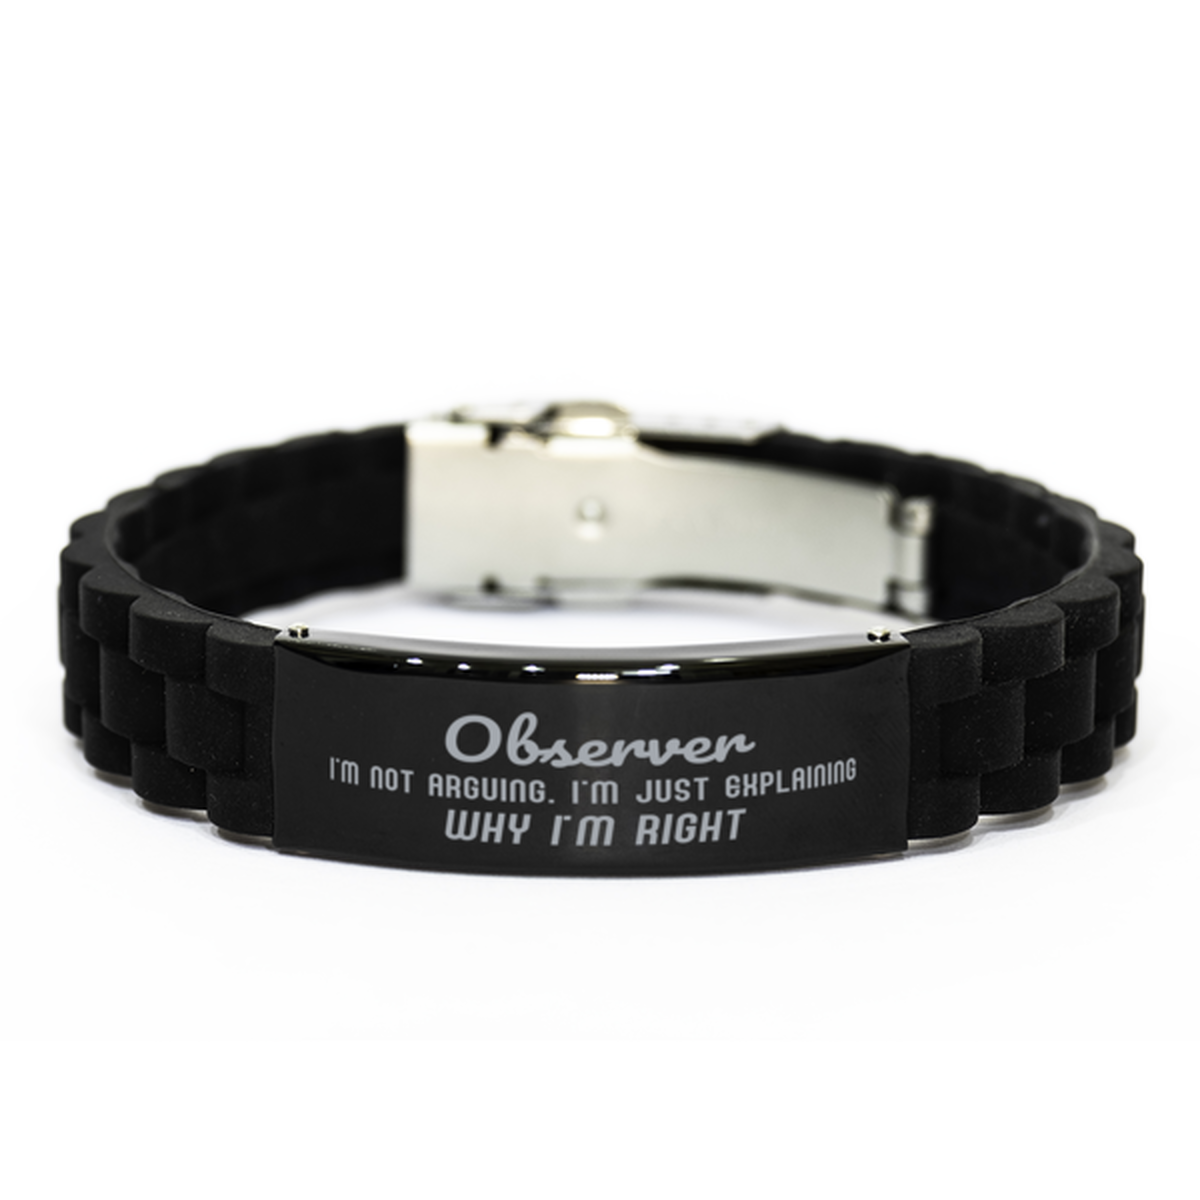 Observer I'm not Arguing. I'm Just Explaining Why I'm RIGHT Black Glidelock Clasp Bracelet, Funny Saying Quote Observer Gifts For Observer Graduation Birthday Christmas Gifts for Men Women Coworker